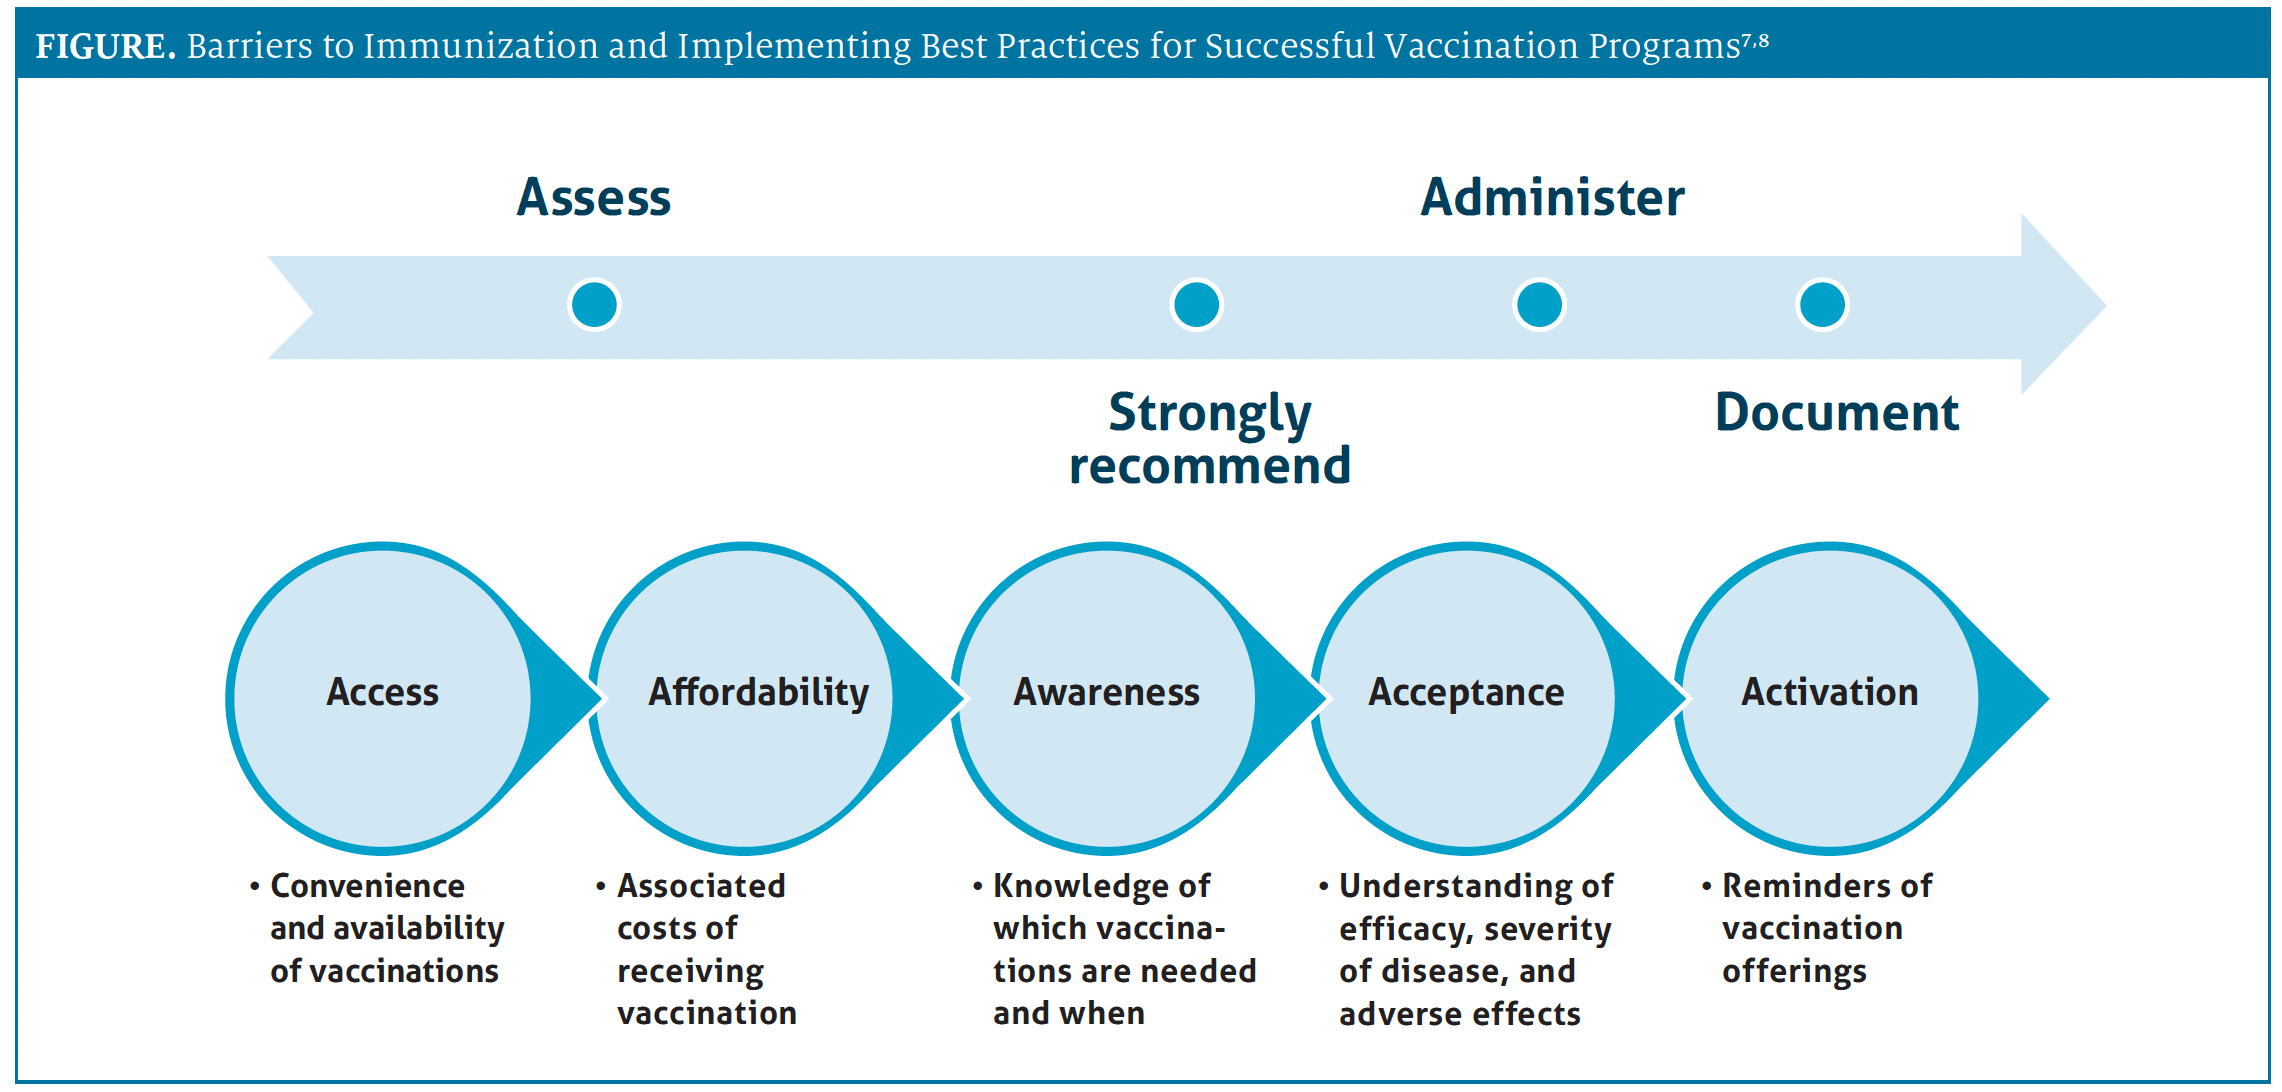 Barriers to Immunization and Implementing Best Practices for Successful Vaccination Programs